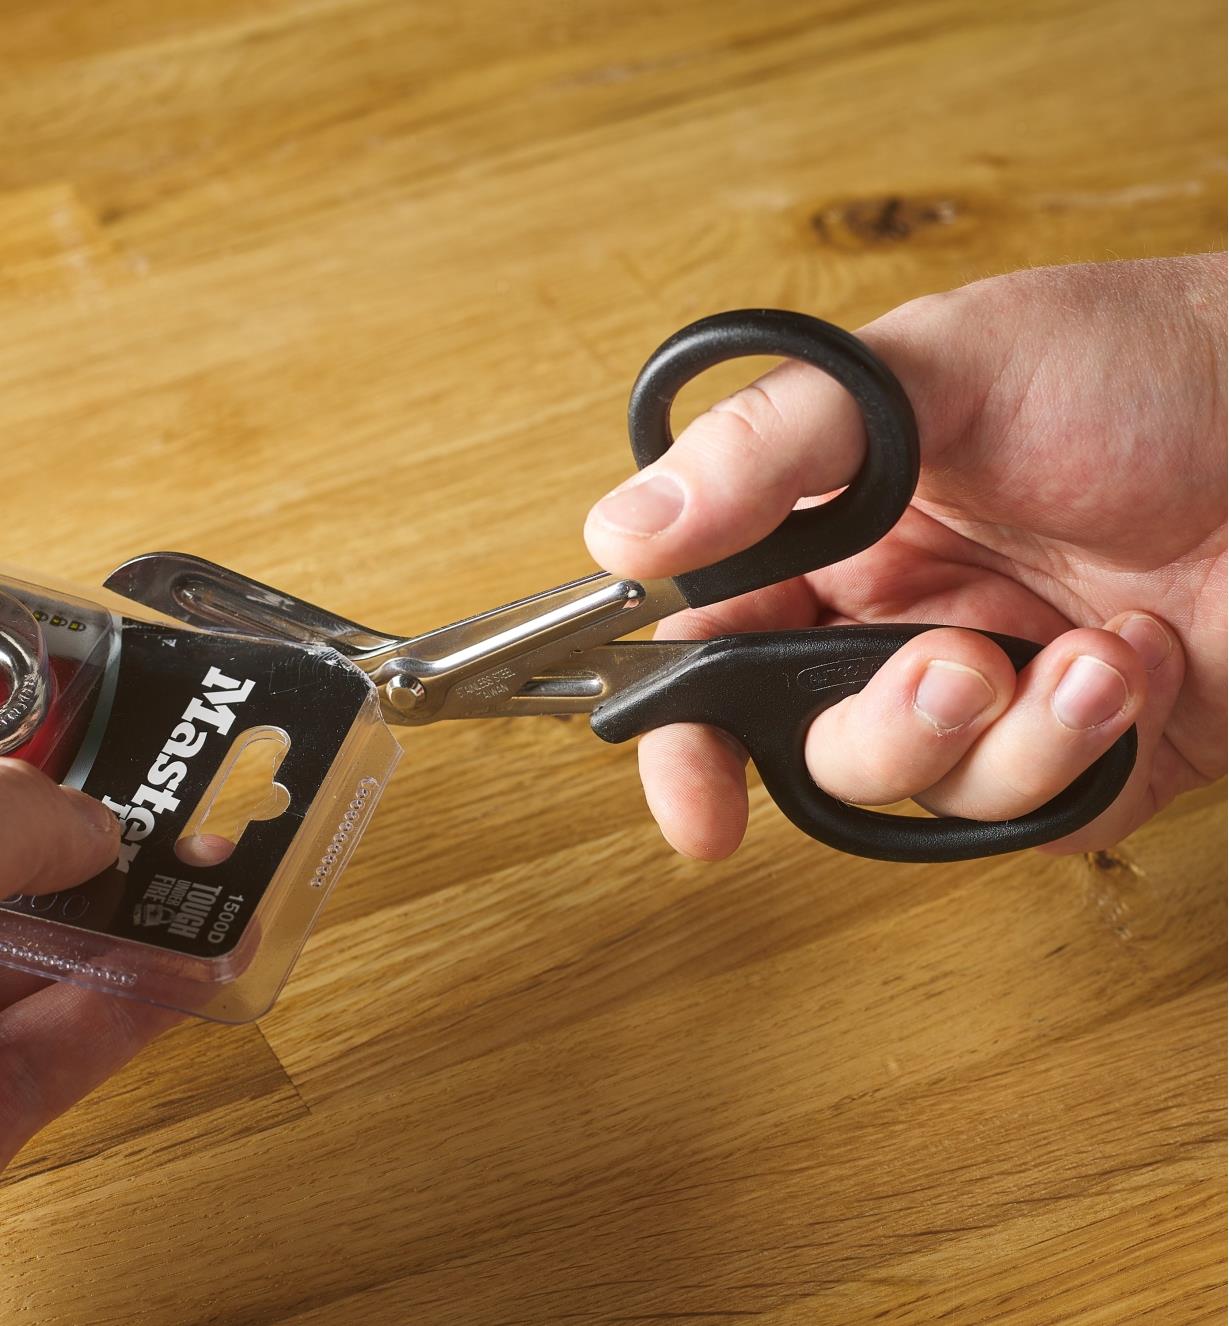 Scissors being used to open plastic clamshell packaging